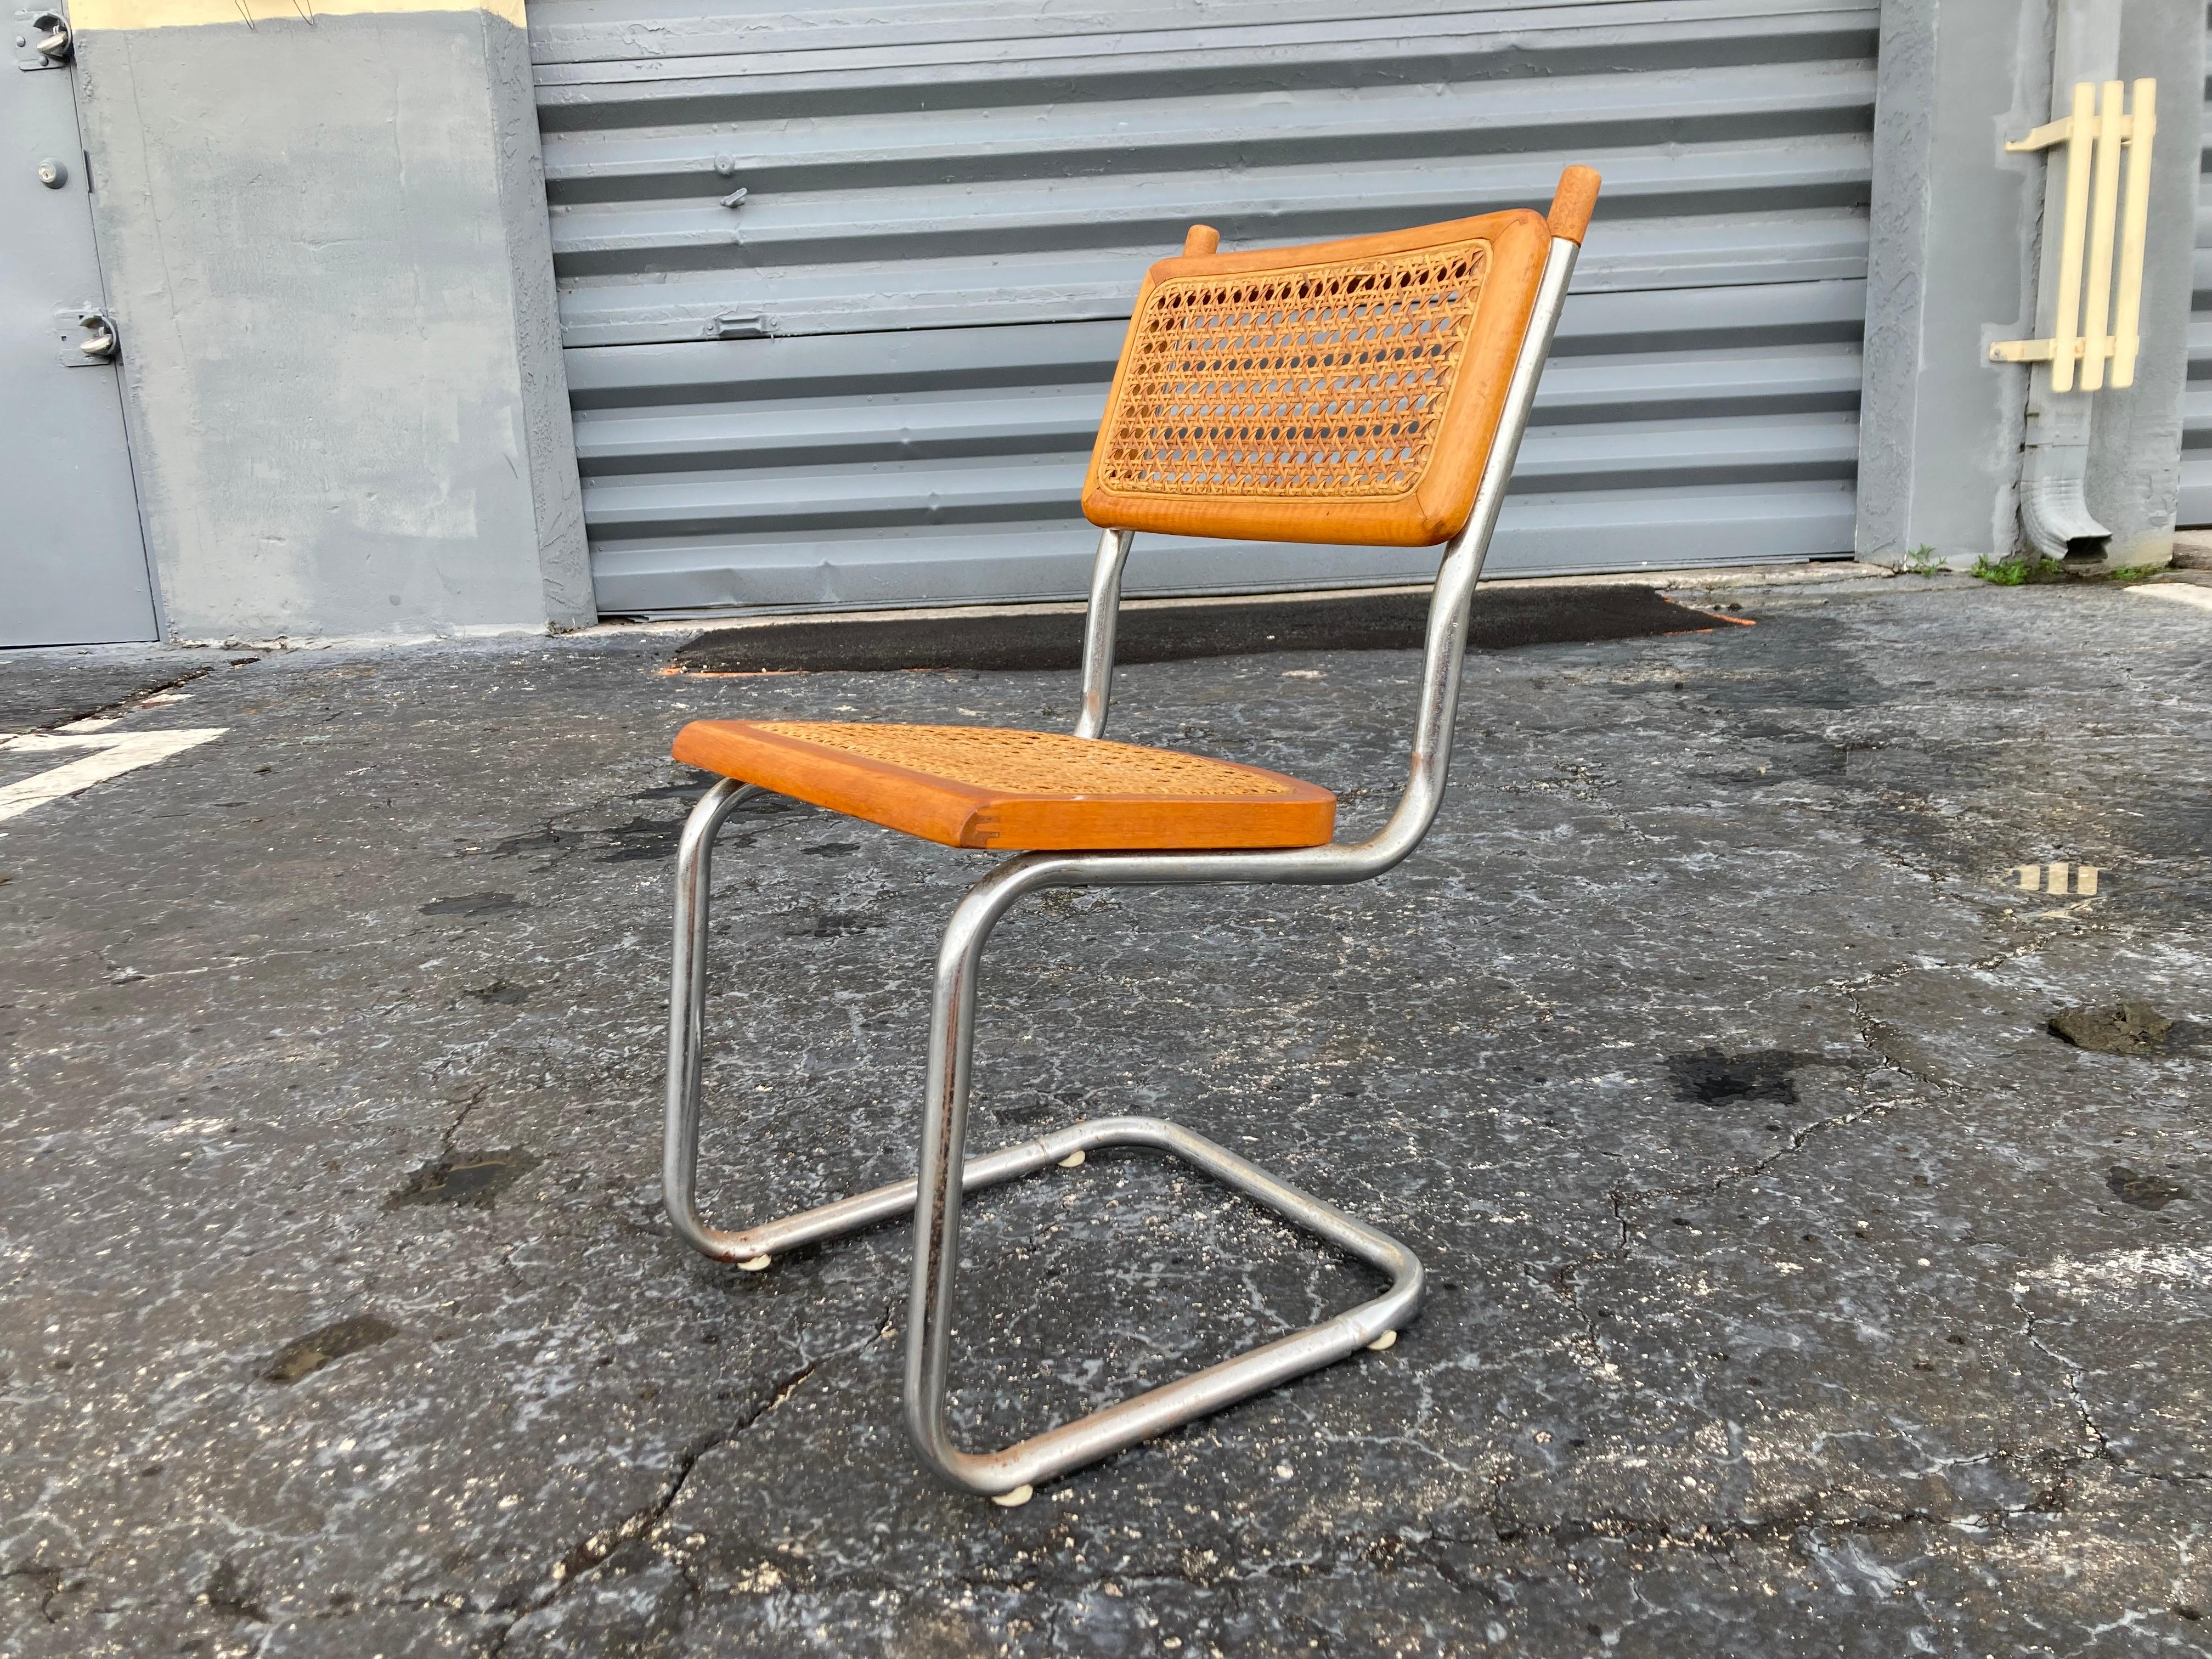 Great Children’s chair in the style of Marcel Breuer’s Cesca Chair. Most likely from the 60s.